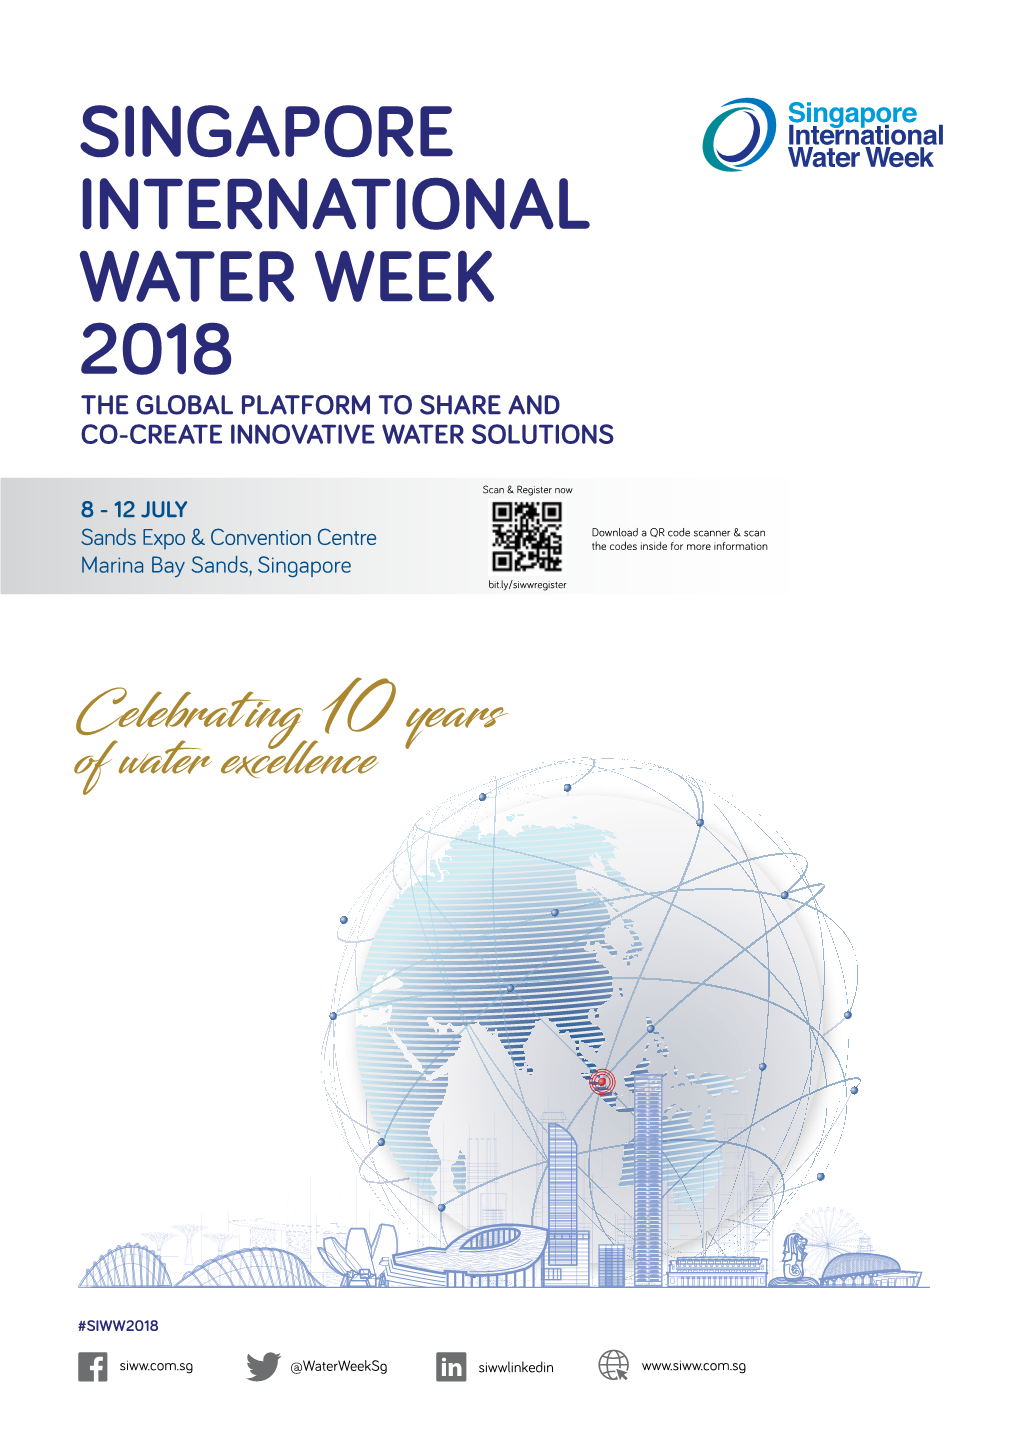 Singapore International Water Week 2018 the Global Platform to Share and Co-Create Innovative Water Solutions